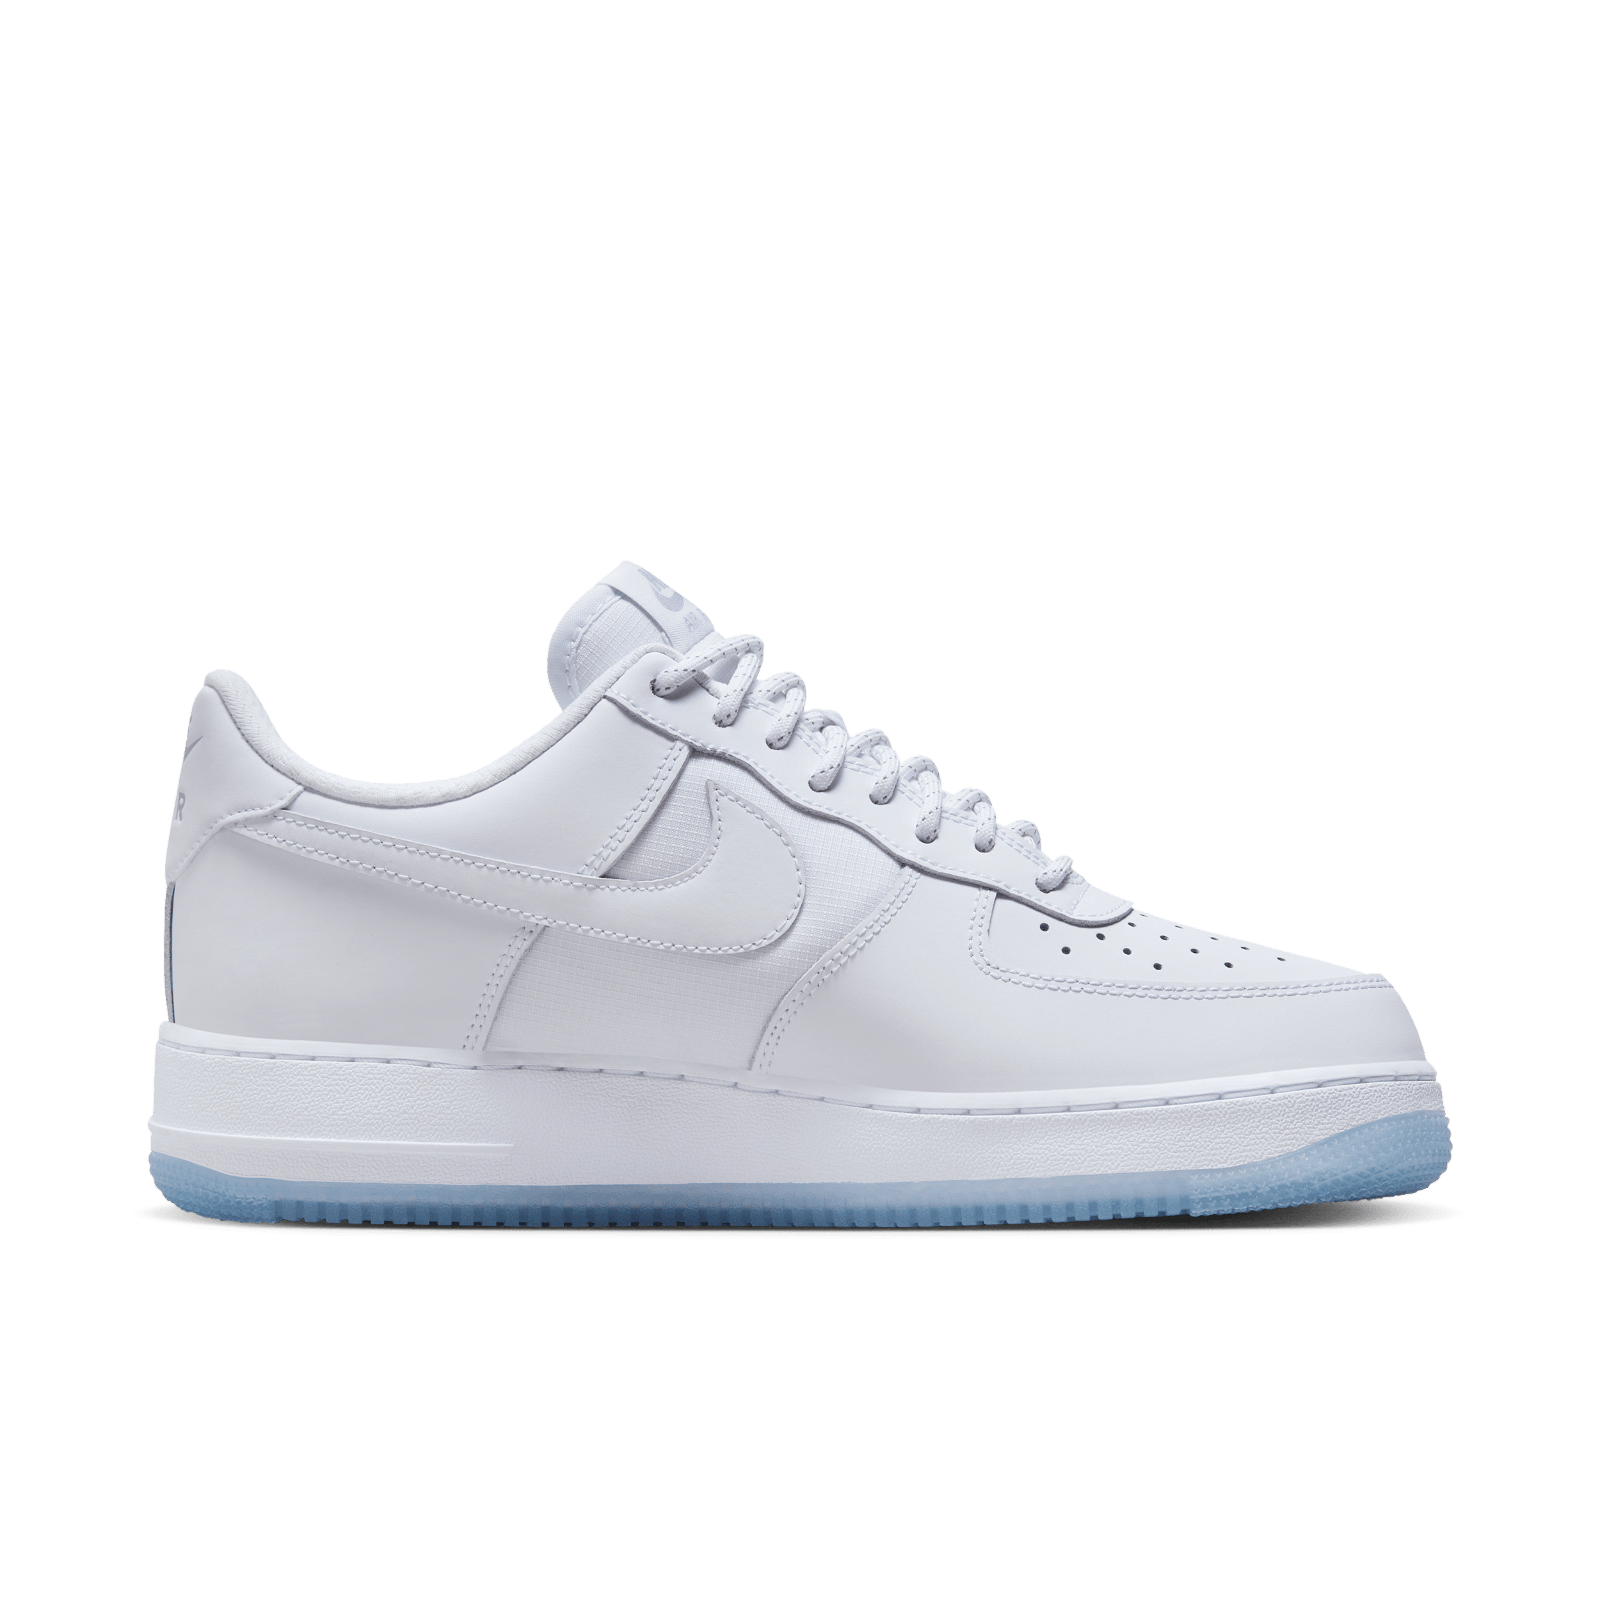 Air Force 1 '07 "White Icy Blue"